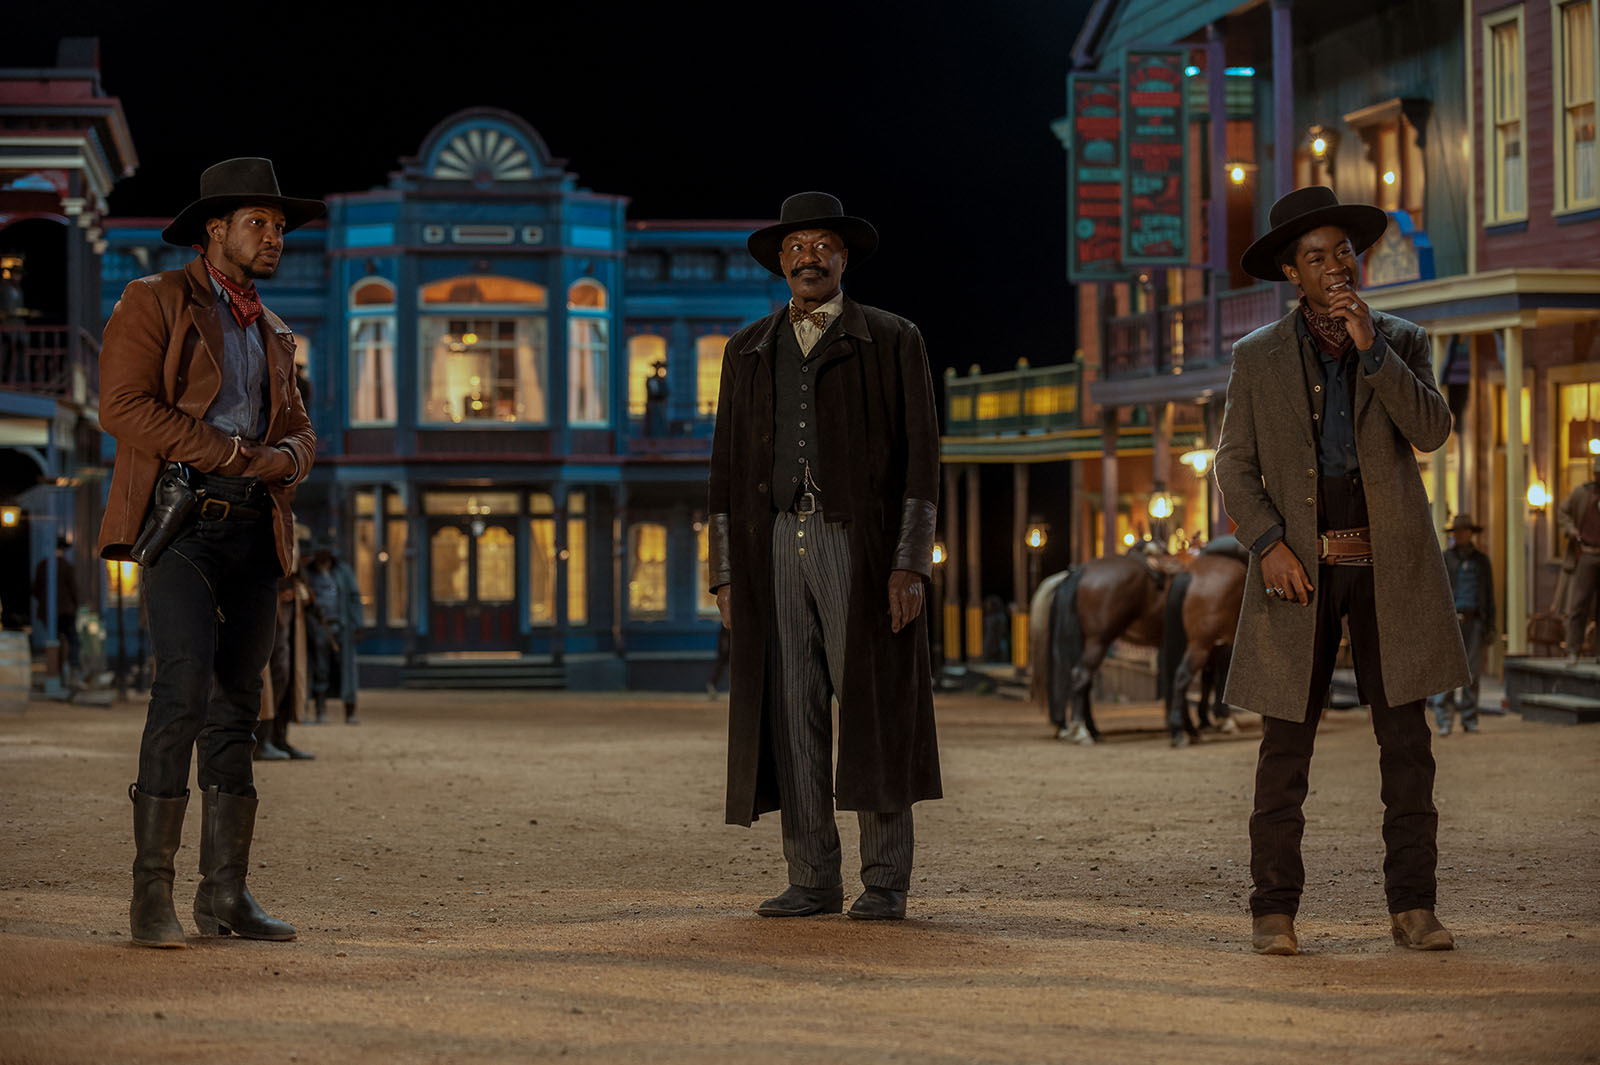 Nat Love (Jonathan Majors), Bass Reeves (Delroy Lindo), and Jim Beckworth (RJ Cyler) in The Harder They Fall. Image © Netflix